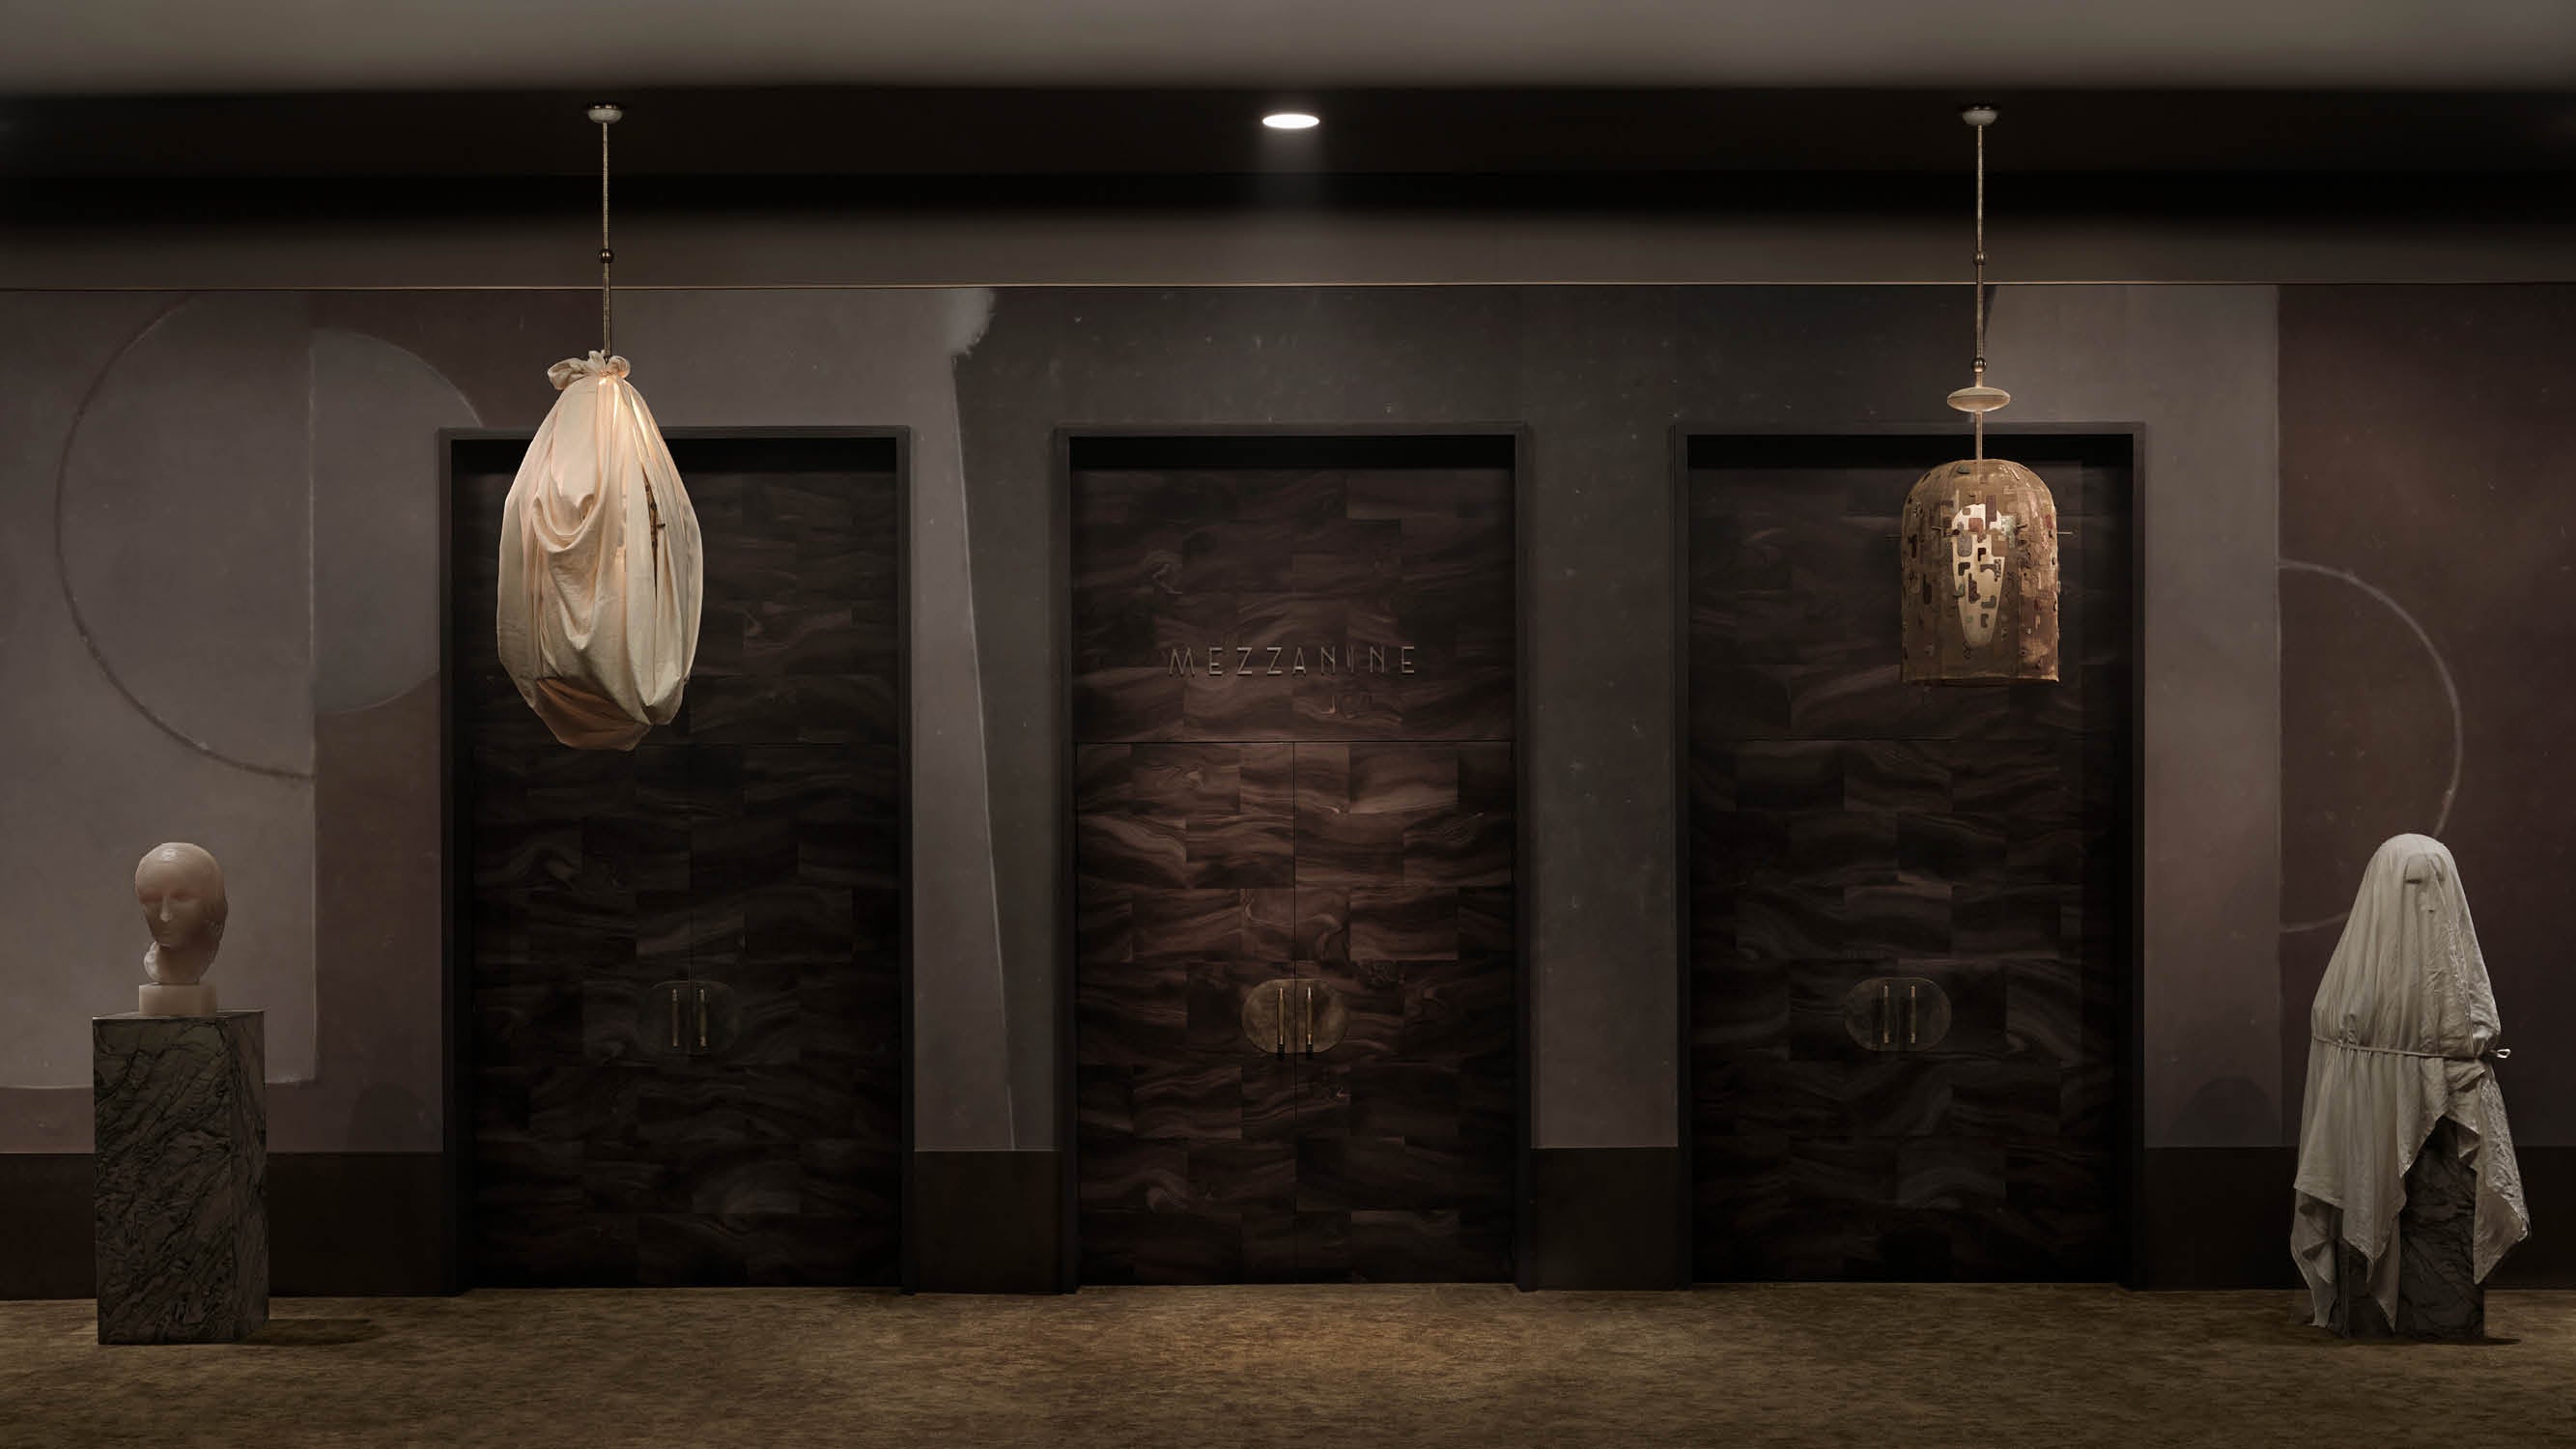 A pair of INTERLUDE hand-embroidered ceiling pendants, one covered with a cloth and the other uncovered, hanging in front of 3 doors. 